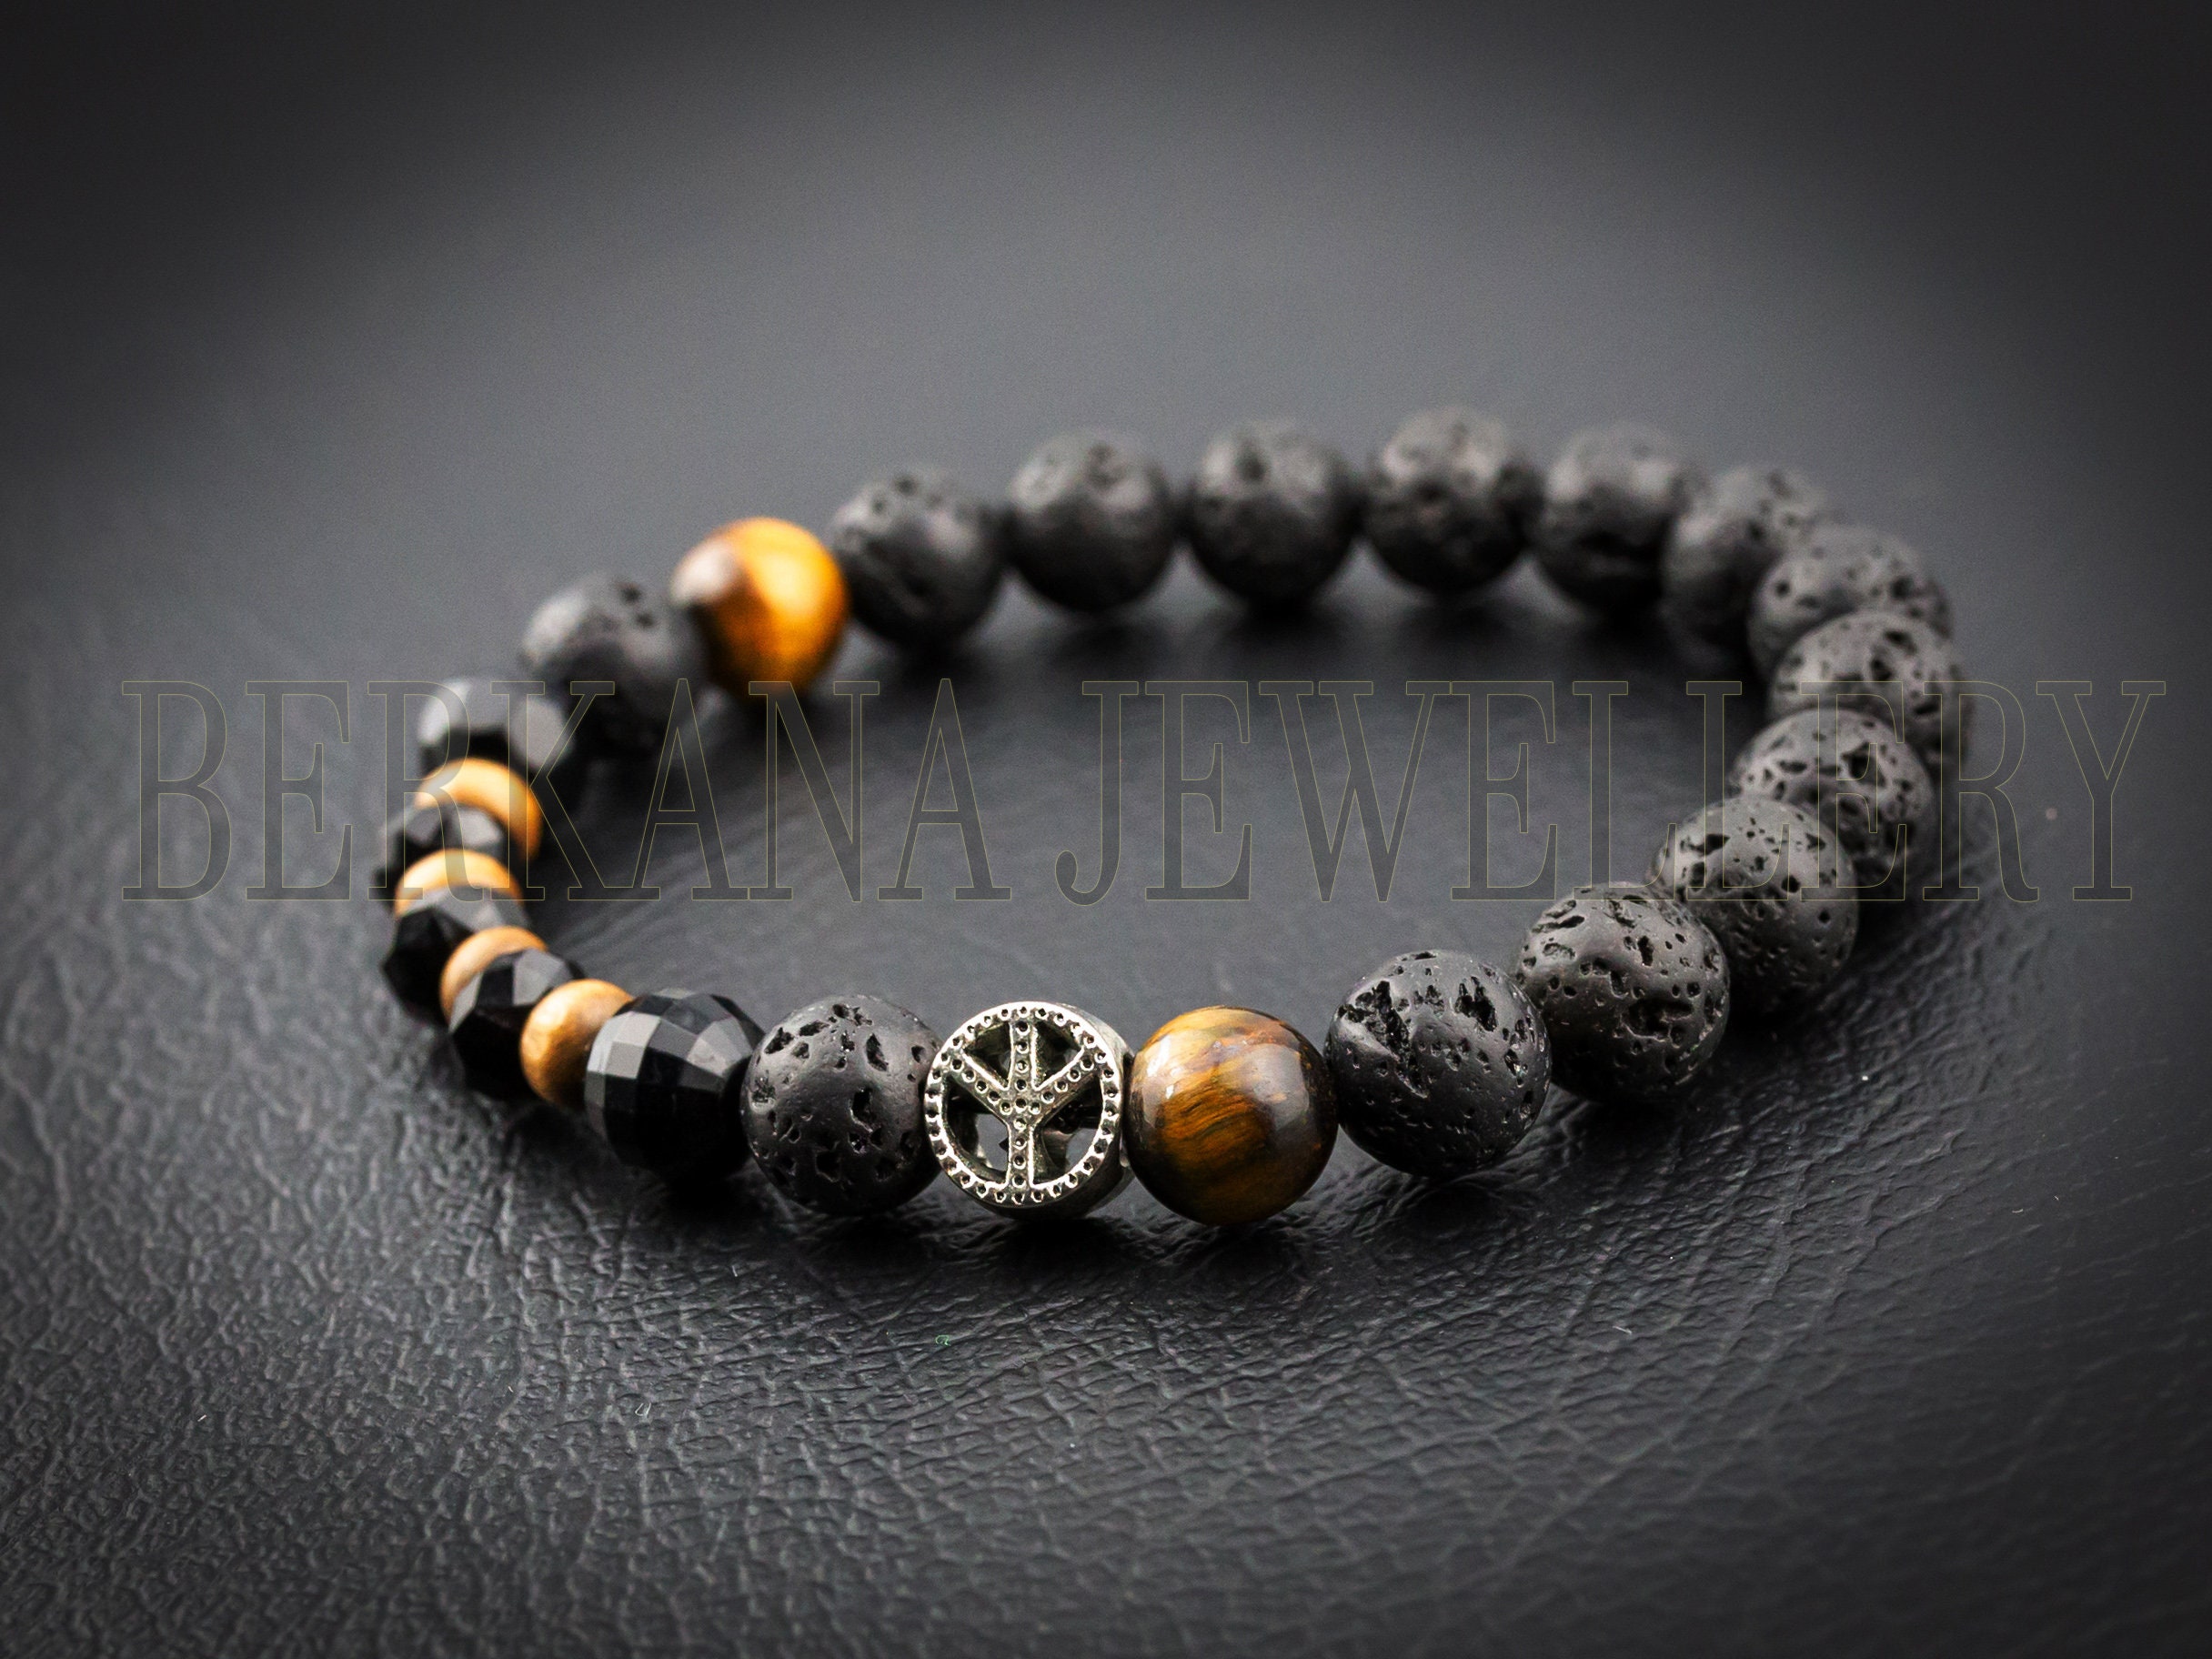 Mens Tiger Bracelet with Tigers Eye Beads